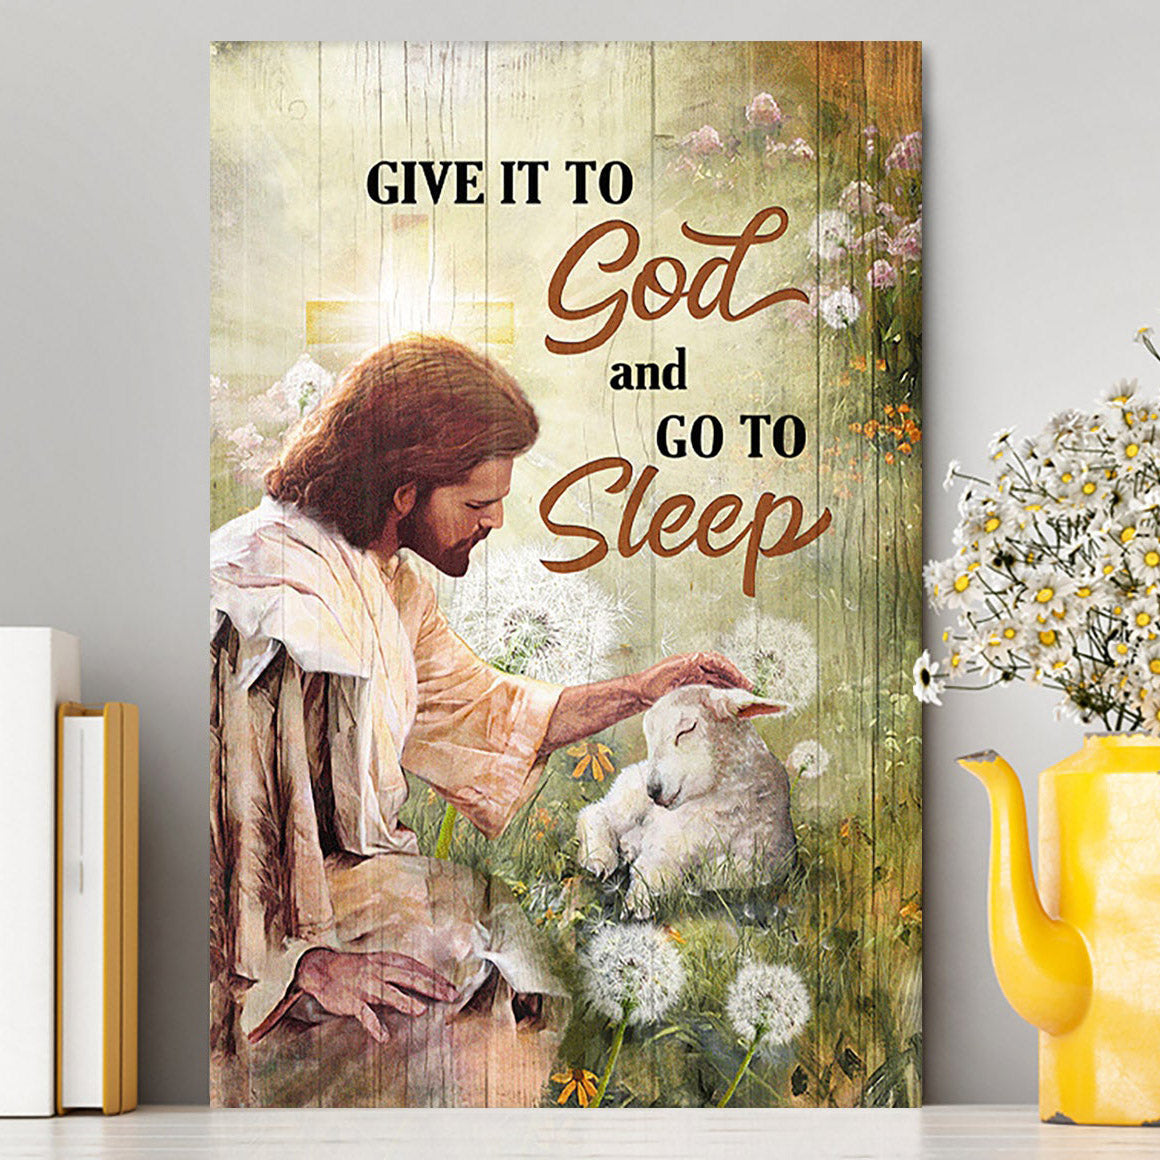 Give It To God And Go To Sleep Canvas - Jesus Baby Lamb Dandelion Field Canvas Wall Art - Christian Canvas Prints